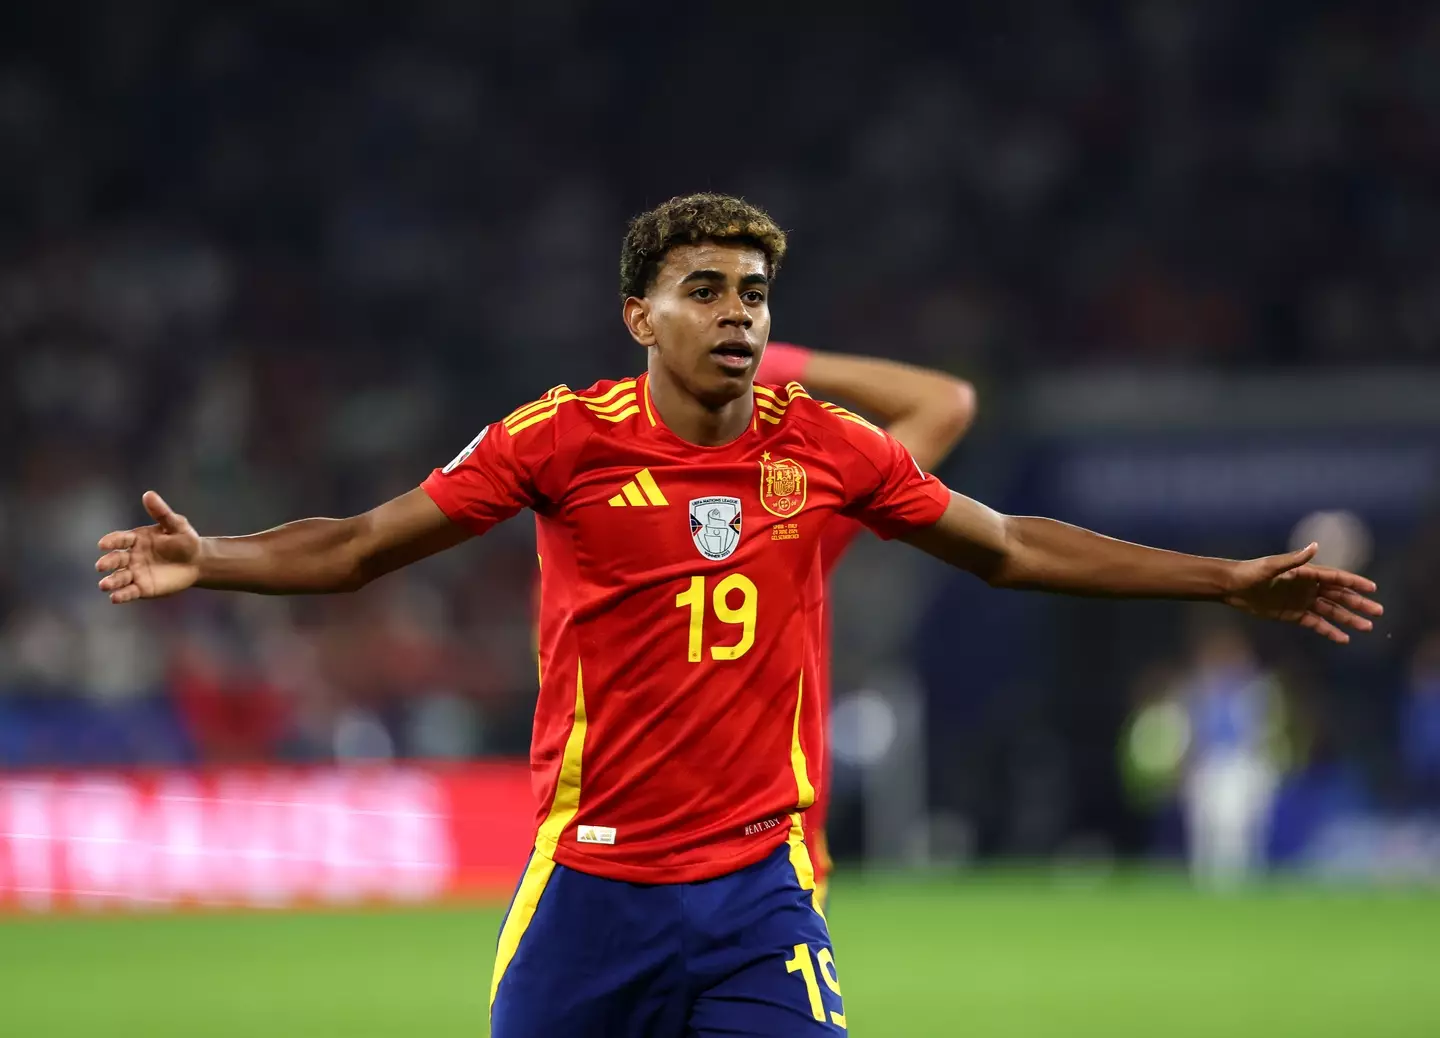 Lamime Yanal in actior for Spain at Euro. Image: Getty